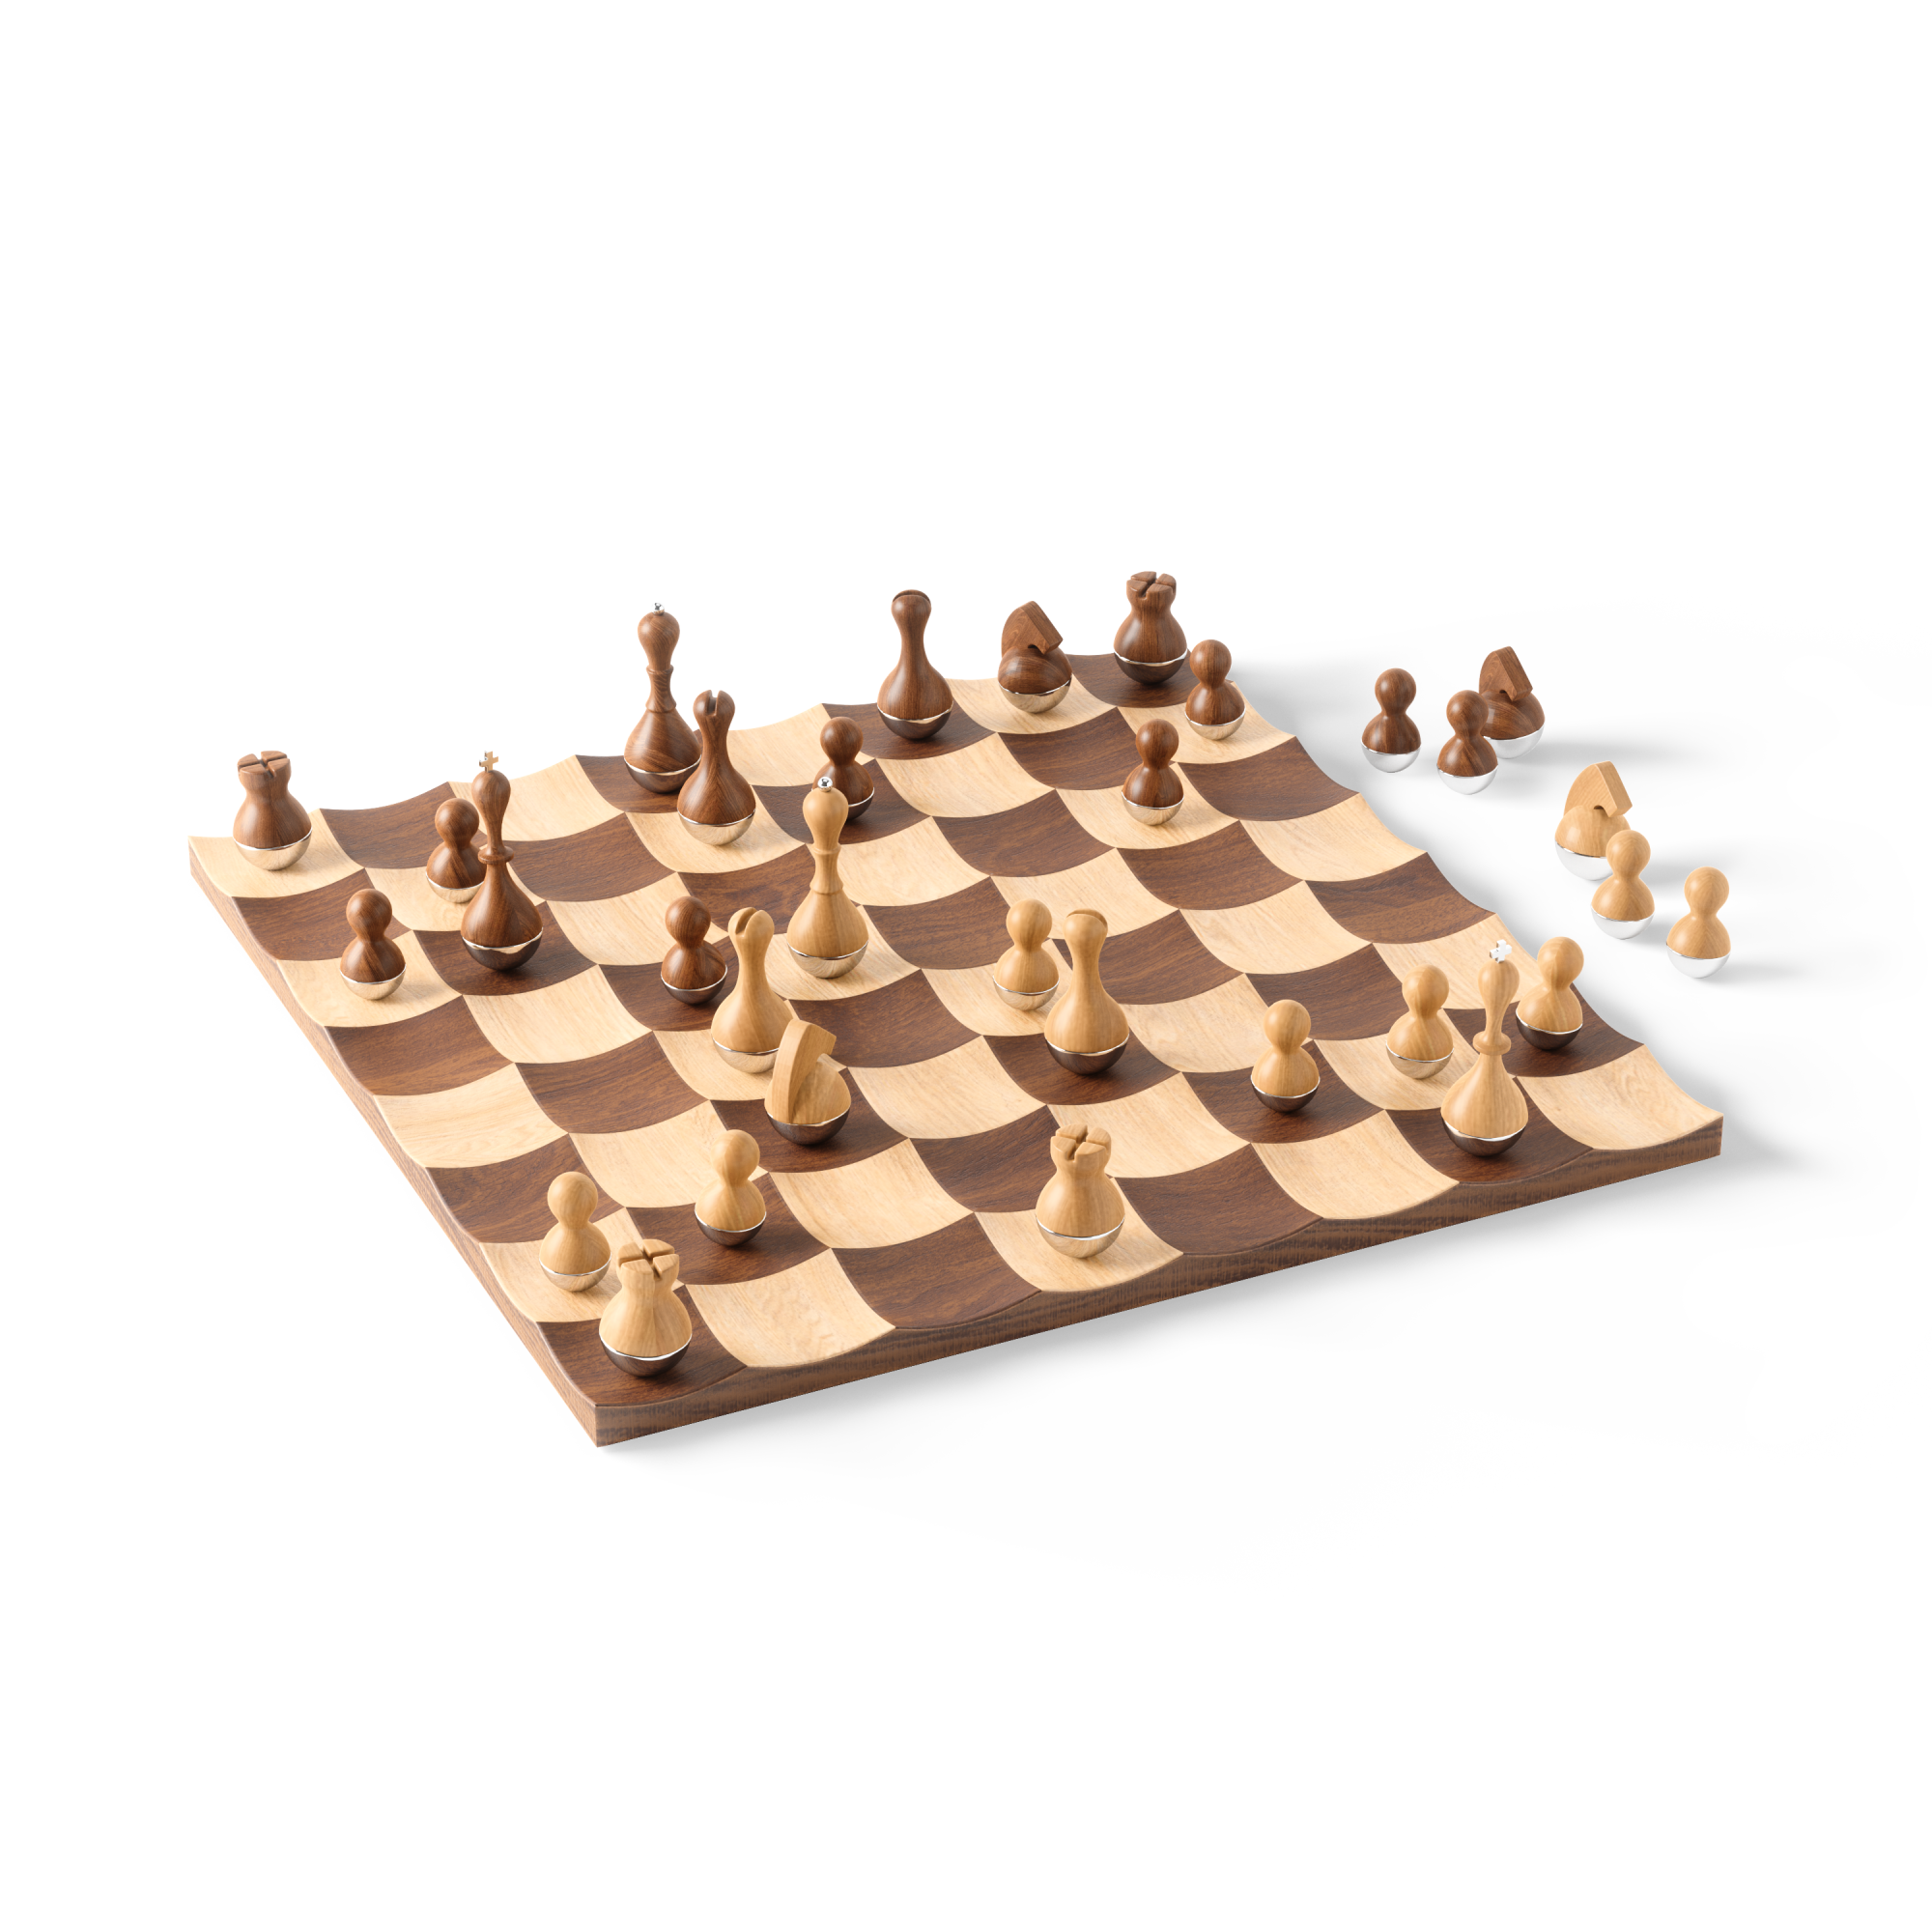 Online chess vs over-the-board chess – House of Chess